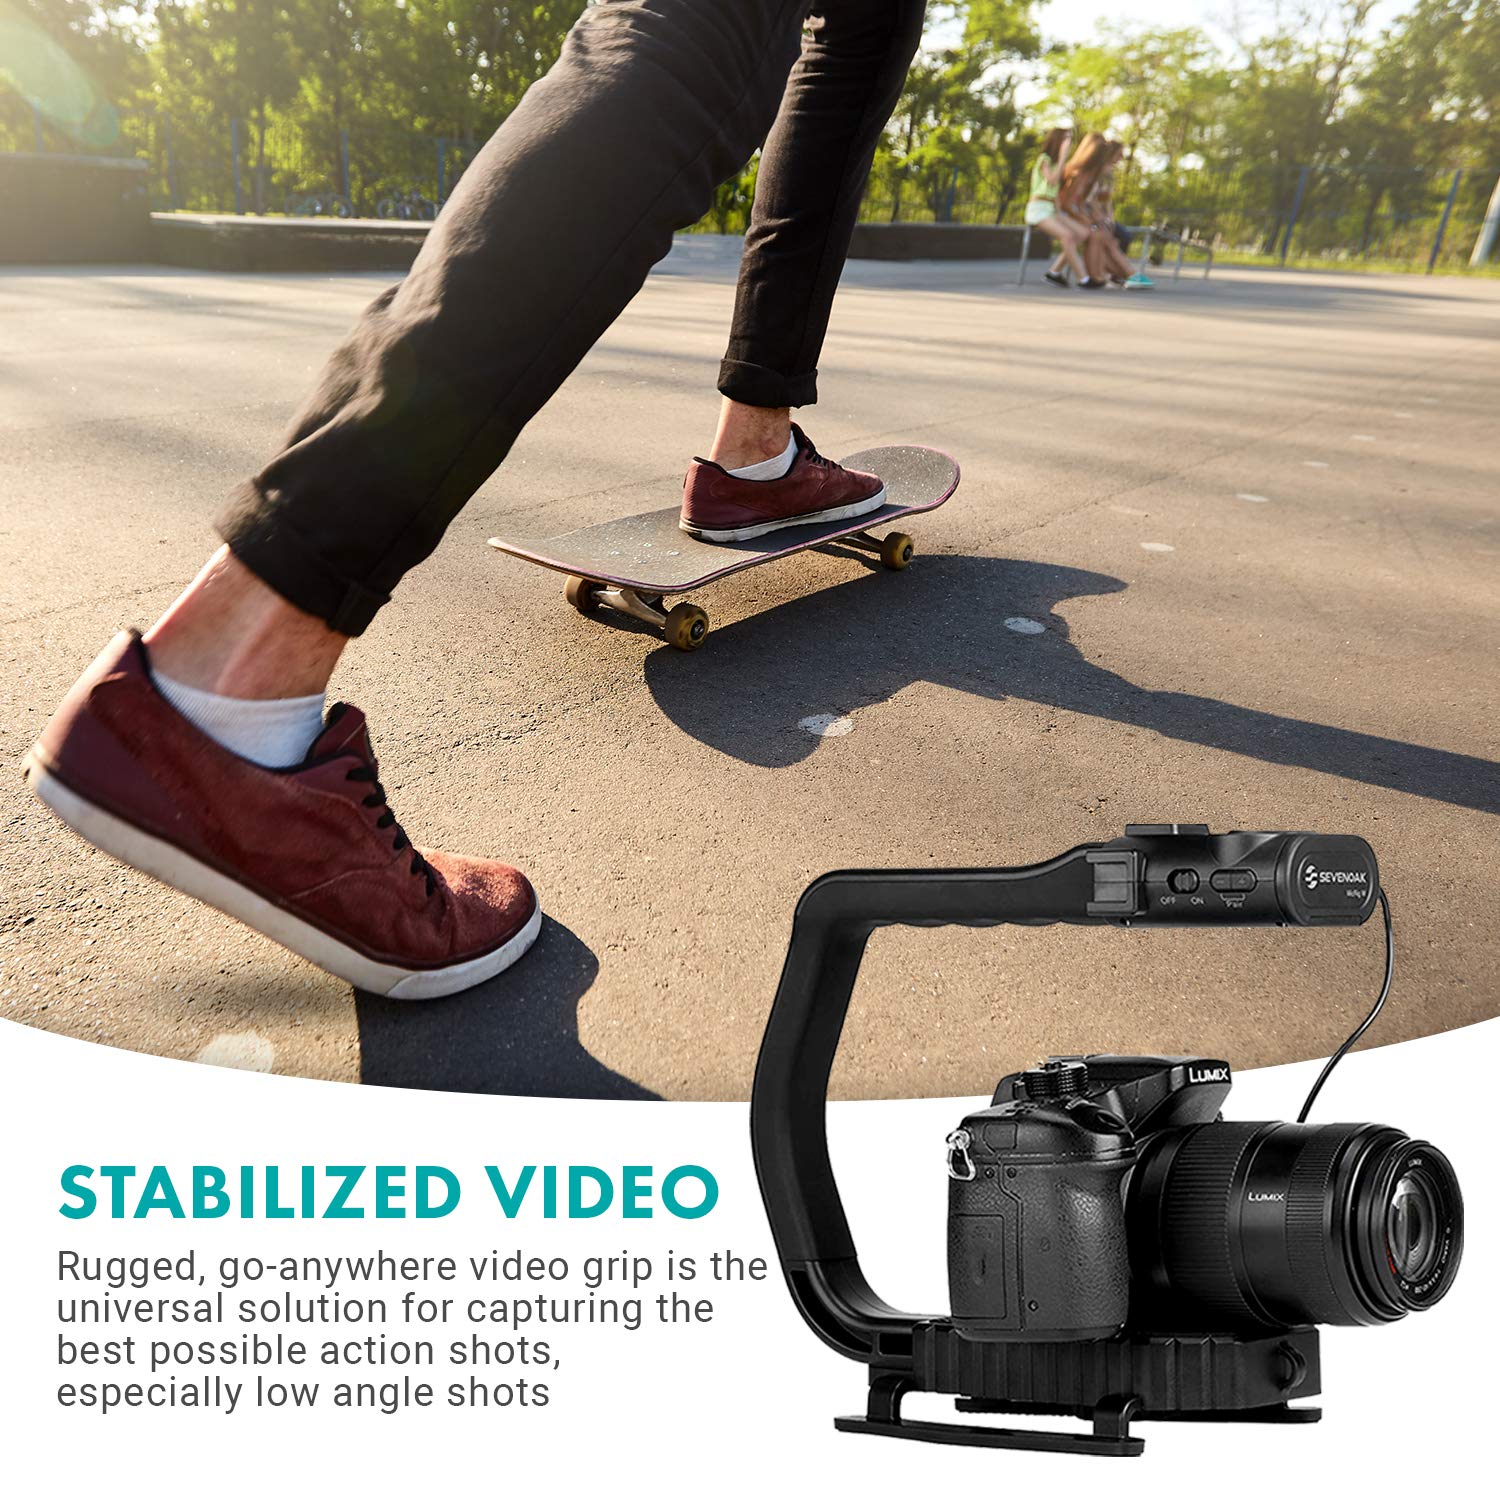 Movo MicRig-W1 Wireless Microphone Filmmaker Kit - Video Handle Stabilizer with Built-in Wireless Lavalier Microphone Compatible with Canon EOS, Nikon, Sony, Panasonic DSLR and Mirrorless Cameras  - Very Good